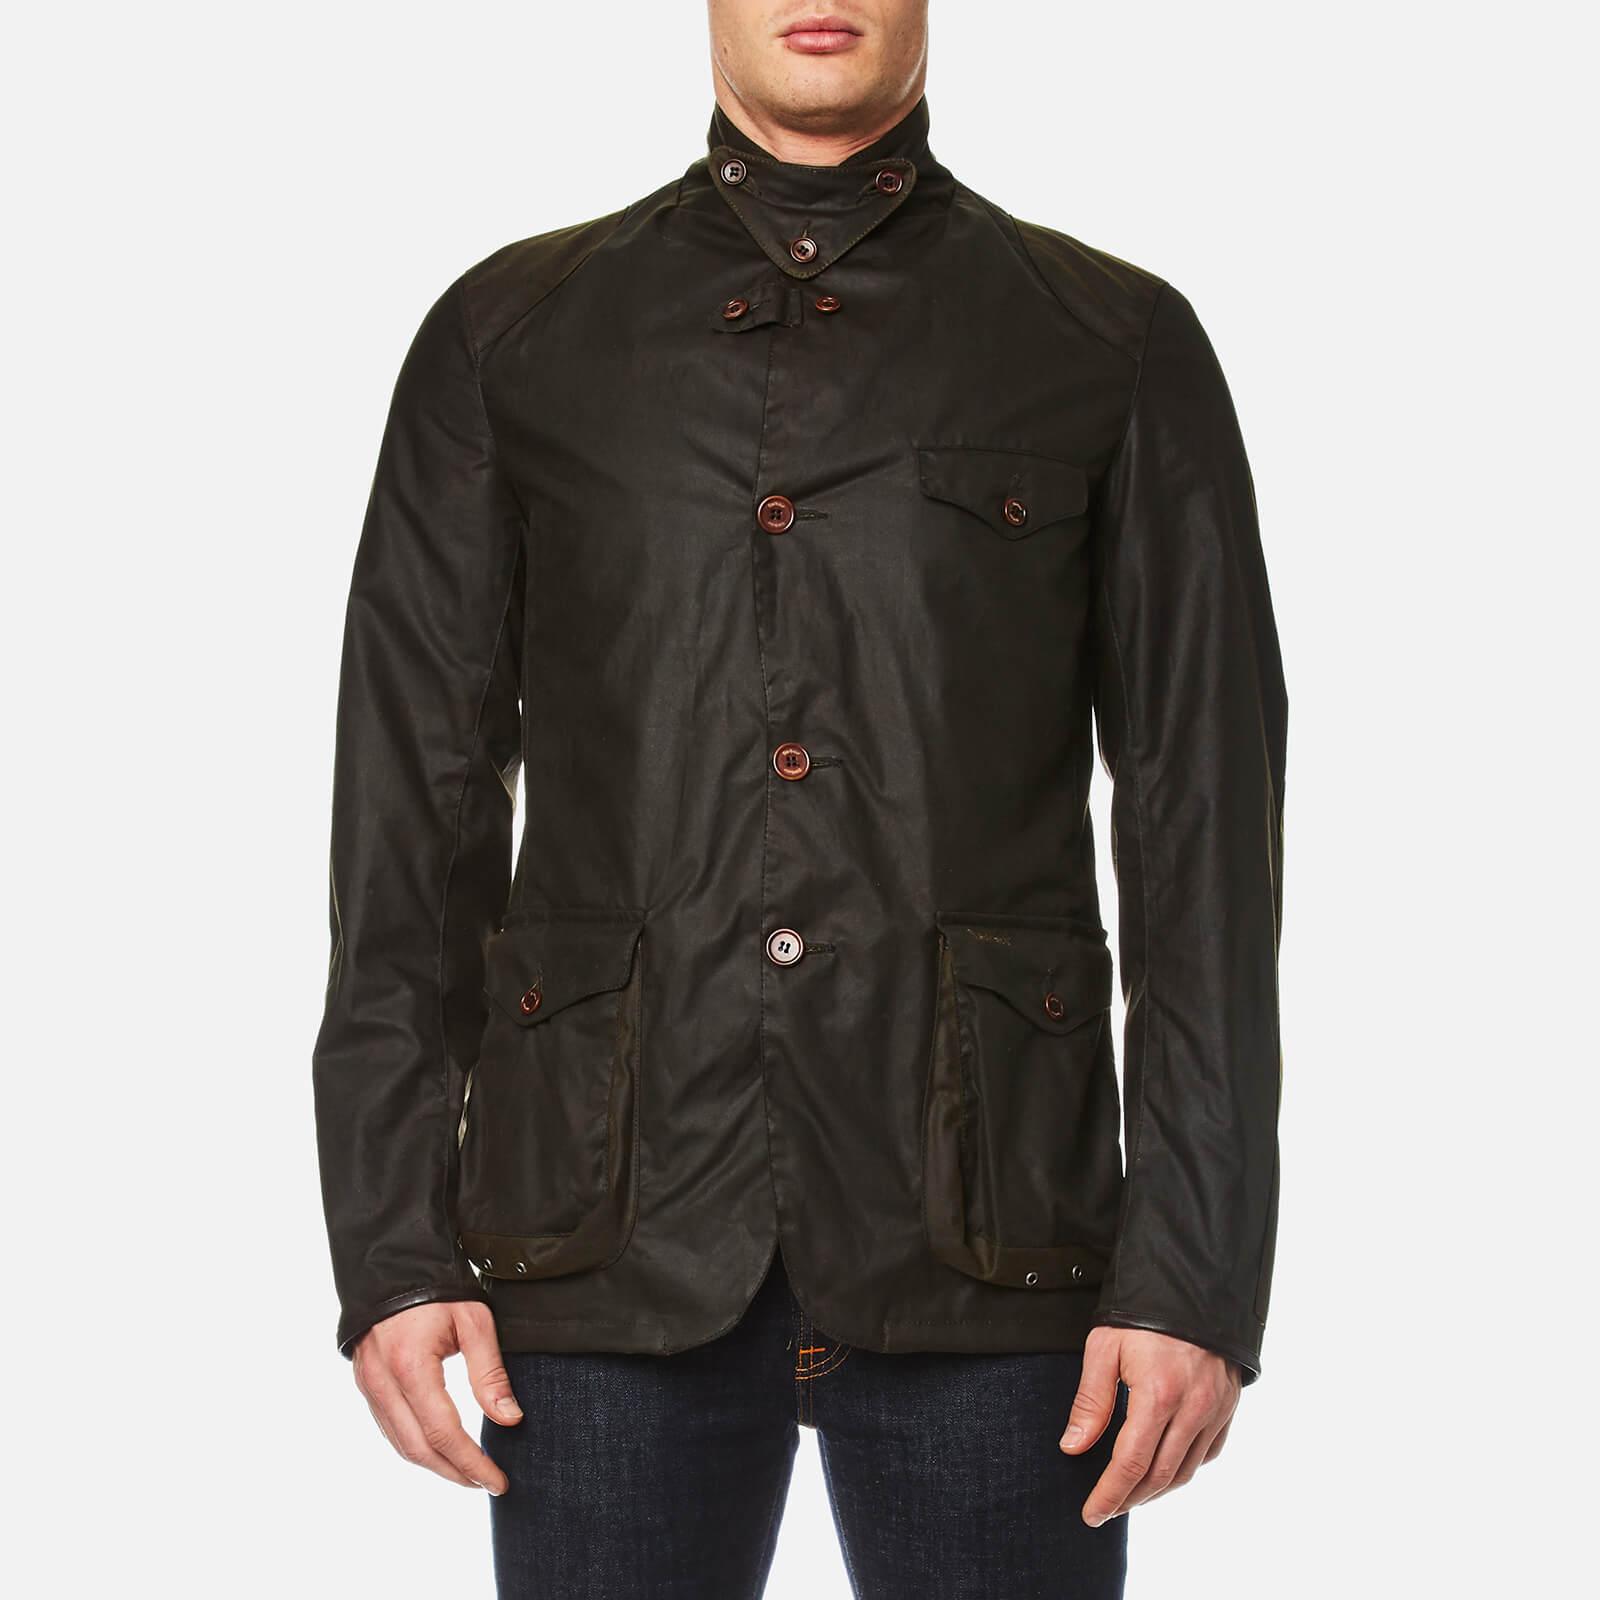 Barbour Cotton Beacon Sports Jacket in Green for Men - Lyst